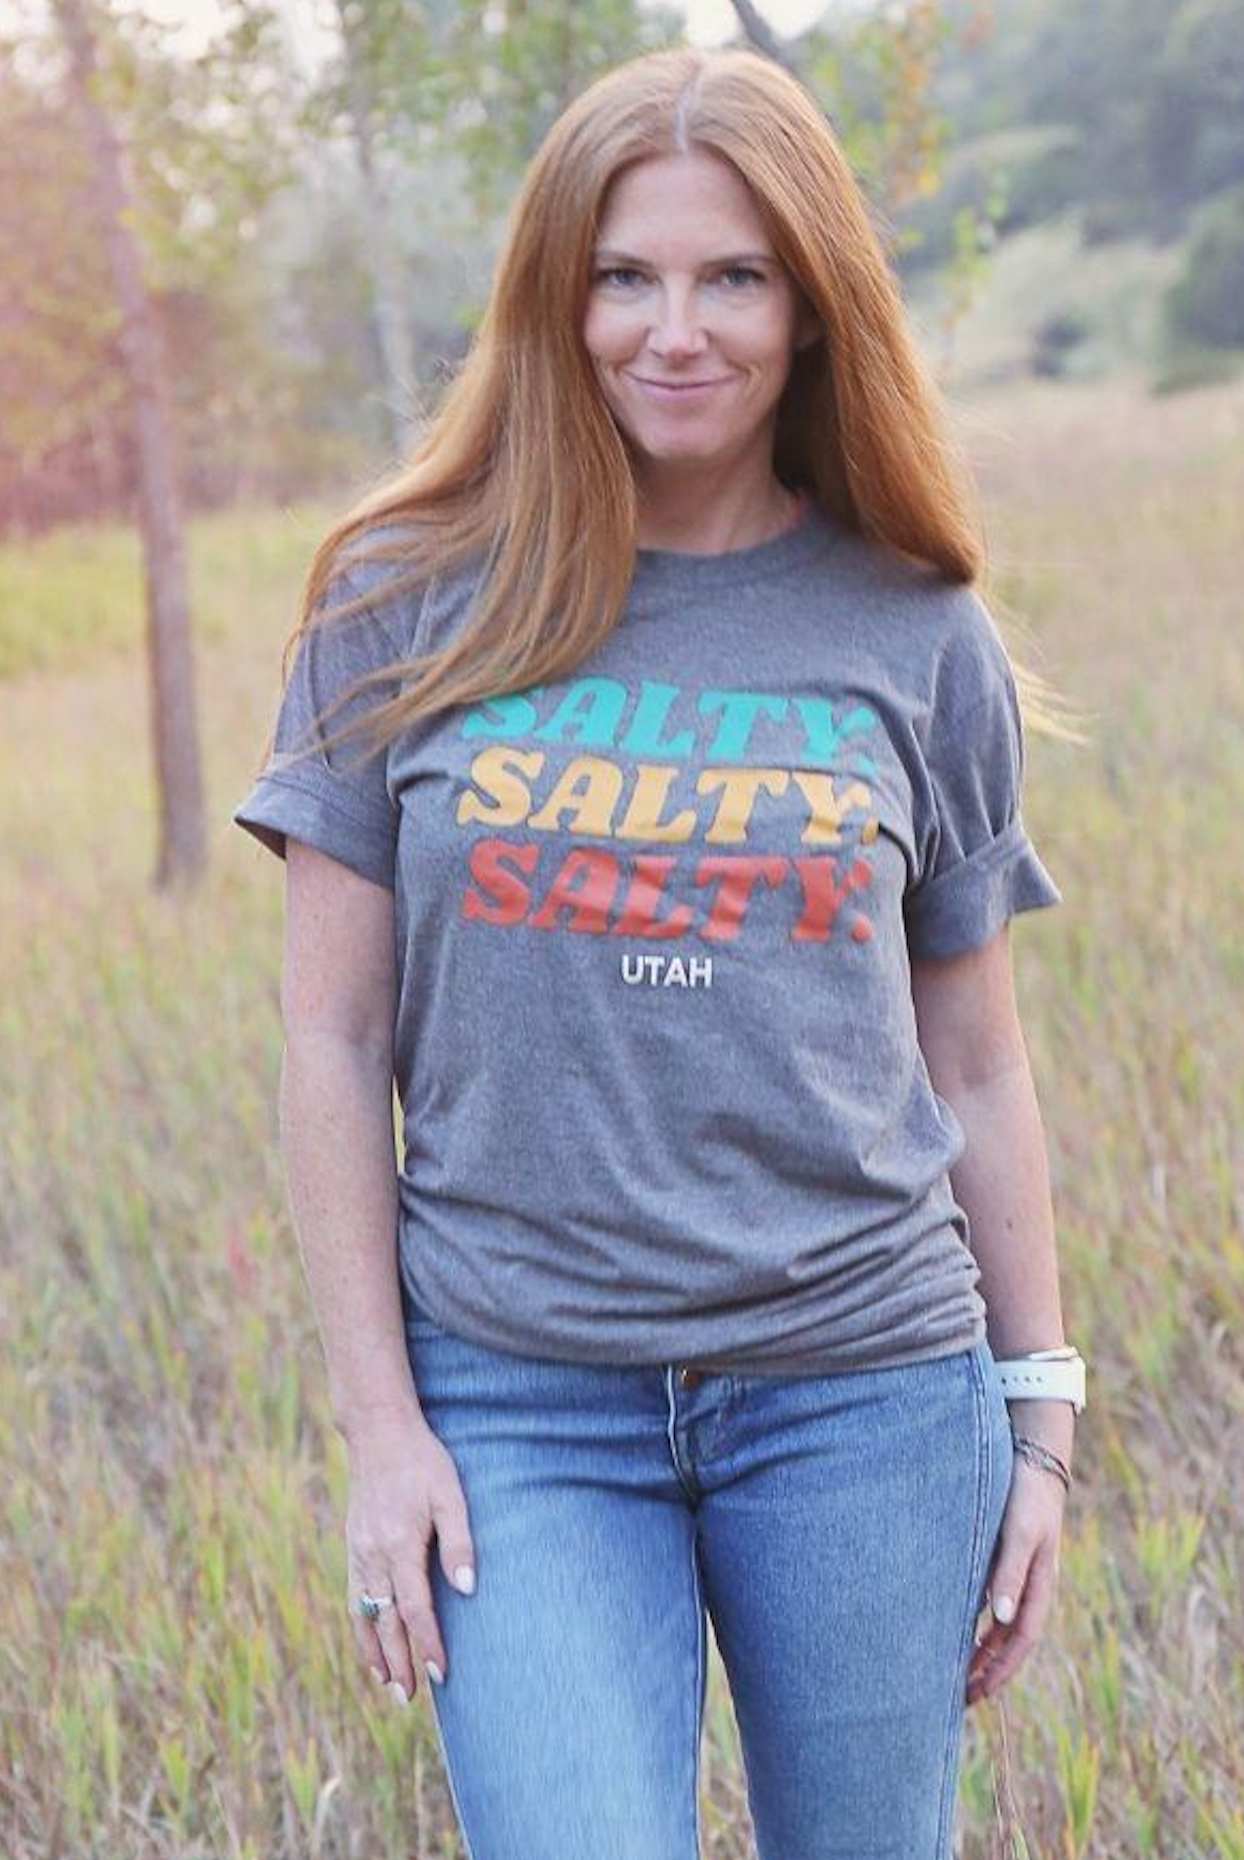 Salty Salty Salty Graphic Tee - Gray - All sales final